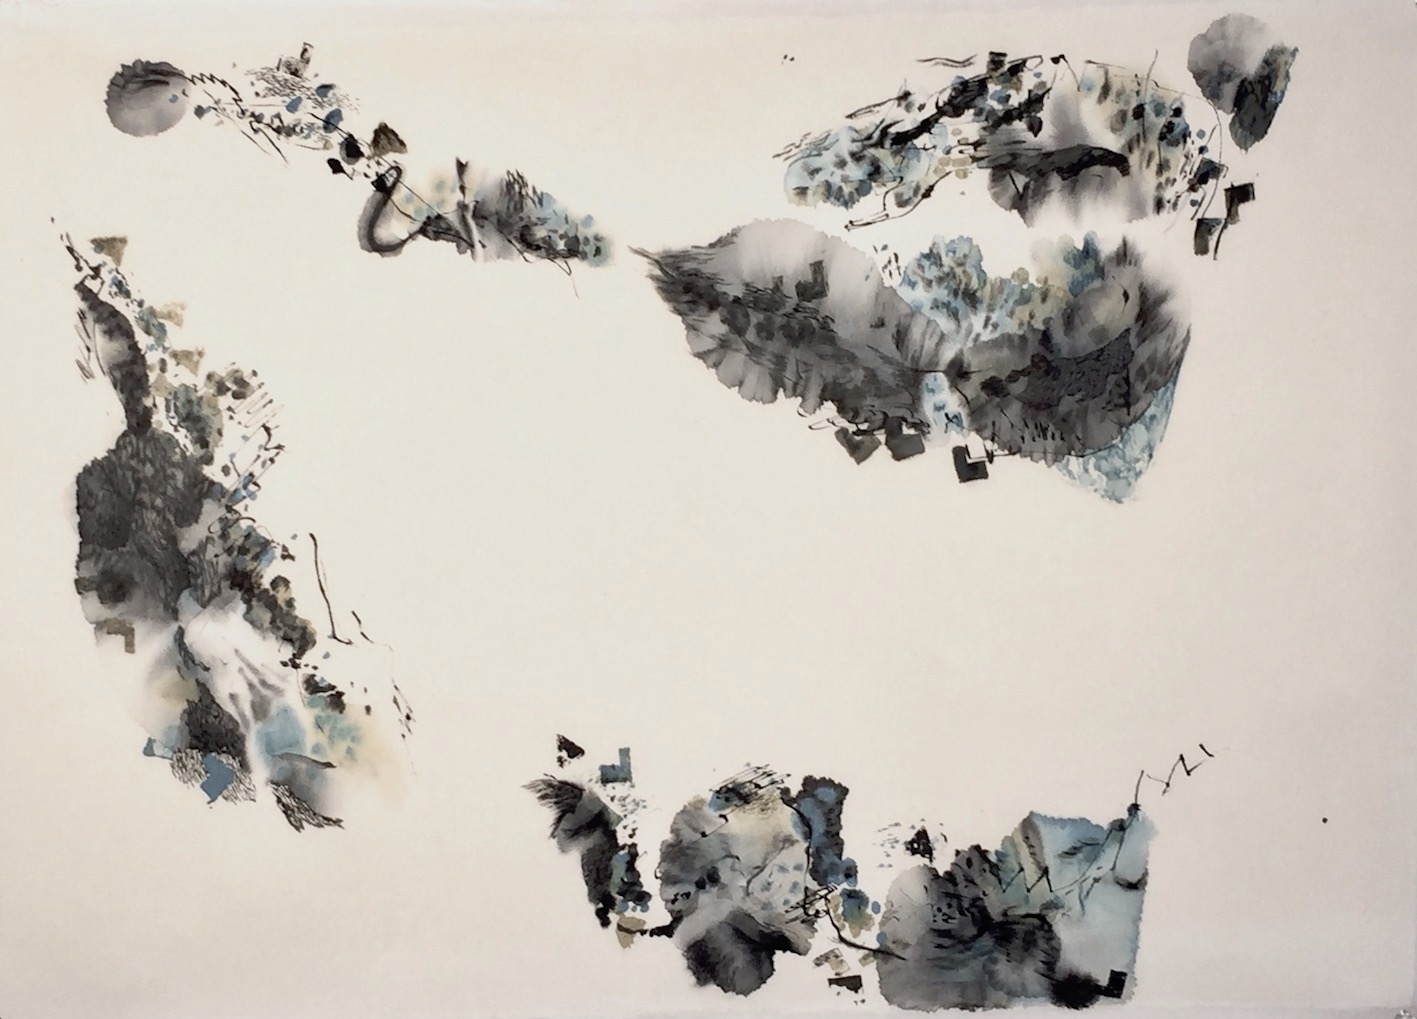 Lines open up 2 開く線 2 50 X 73 cm Sumi ink,water colour, acrylic 墨、水彩、アクリル 2021